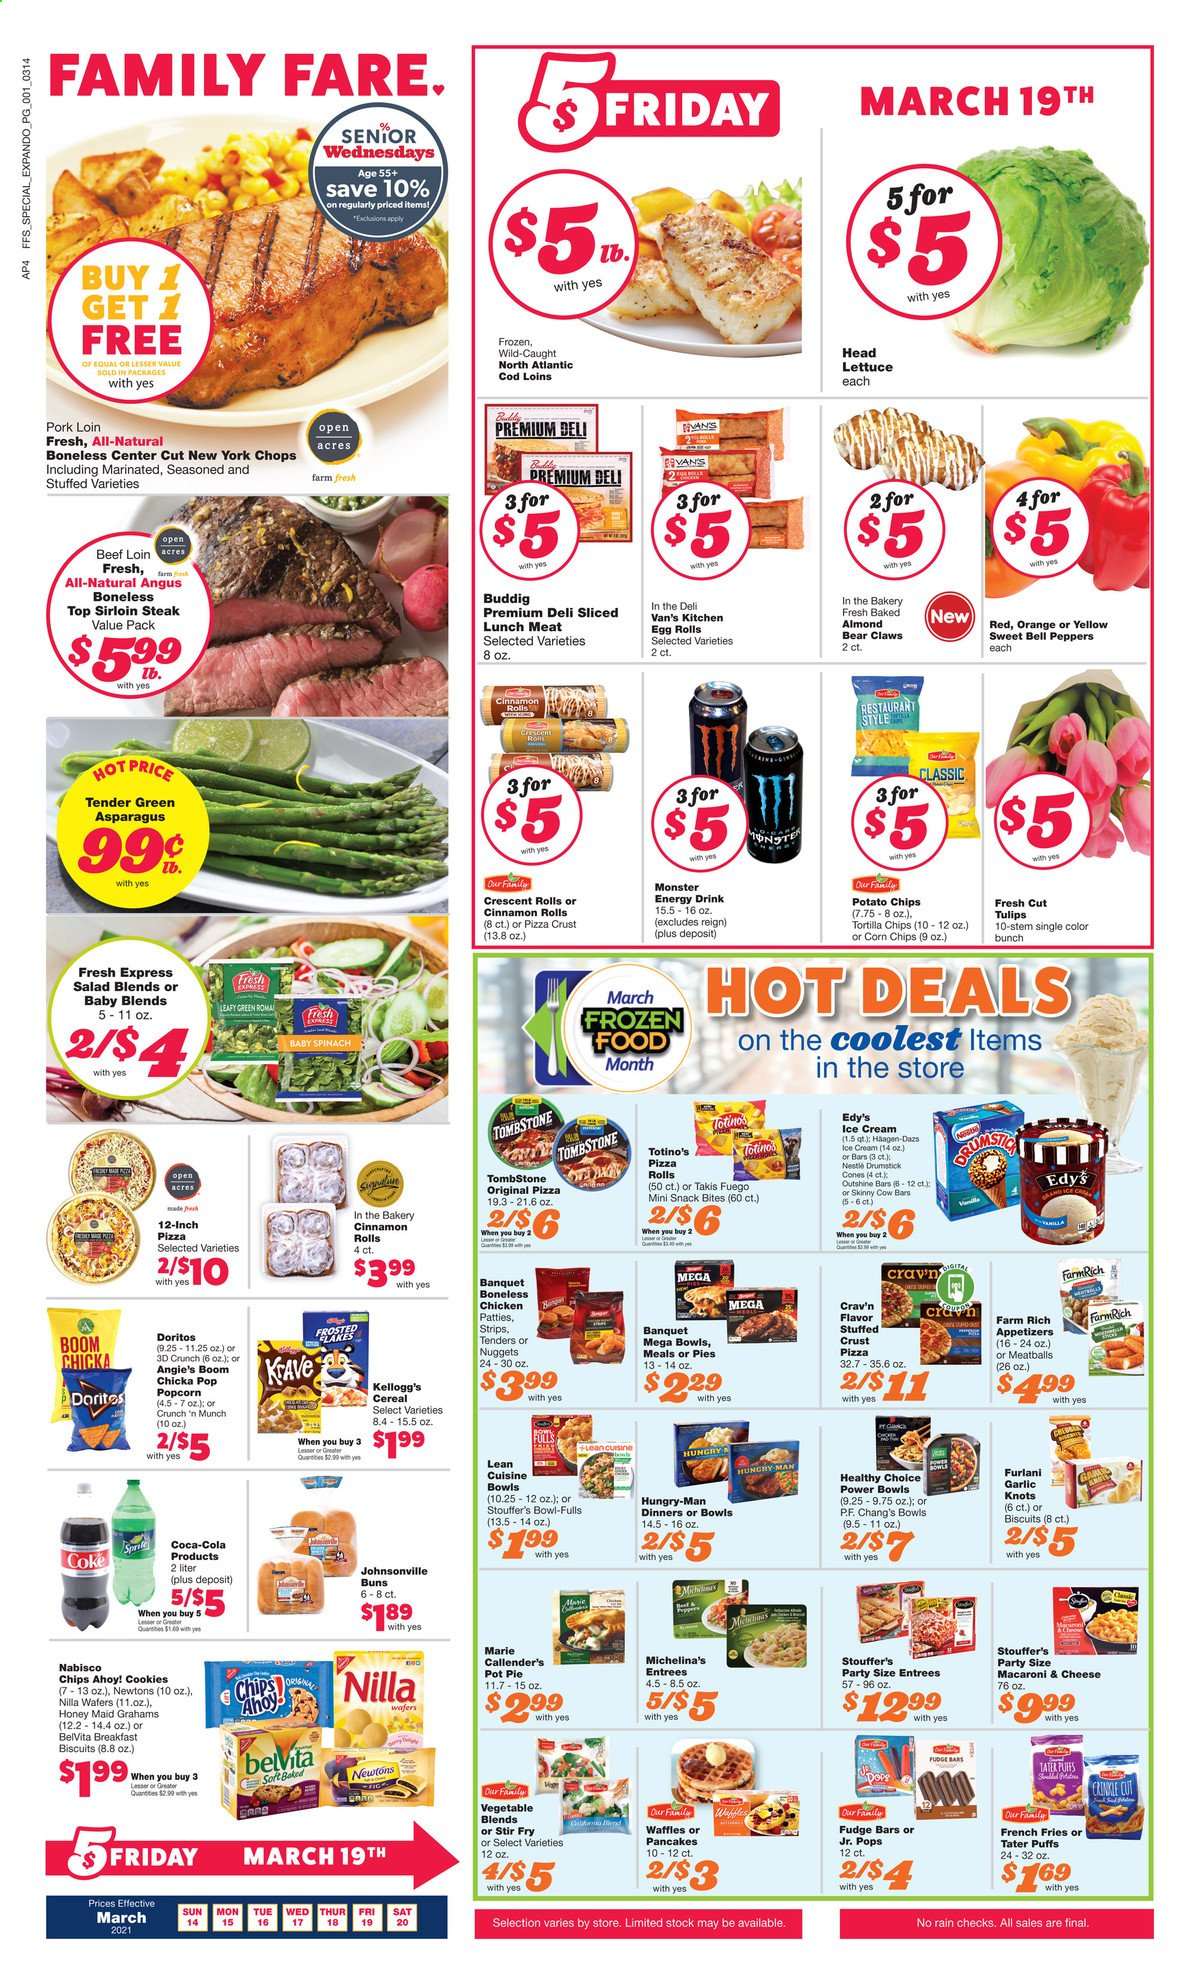 thumbnail - Family Fare Flyer - 03/14/2021 - 03/20/2021 - Sales products - bell peppers, lettuce, pizza rolls, Johnsonville, cinnamon roll, crescent rolls, pot pie, puffs, pie, pancakes, buns, waffles, oranges, cod, macaroni & cheese, pizza, meatballs, nuggets, salad, egg rolls, Healthy Choice, Marie Callender's, bowl-fulls, lunch meat, ice cream, Häagen-Dazs, spinach, strips, chicken patties, Stouffer's, potato fries, french fries, cookies, fudge, wafers, Kellogg's, biscuit, Chips Ahoy!, Doritos, tortilla chips, potato chips, snack, corn chips, popcorn, garlic, cereals, belVita, Honey Maid, almonds, Coca-Cola, energy drink, Monster, Monster Energy, beef sirloin, steak, sirloin steak, pork loin, pork meat, Voom, pot, tulip. Page 1.